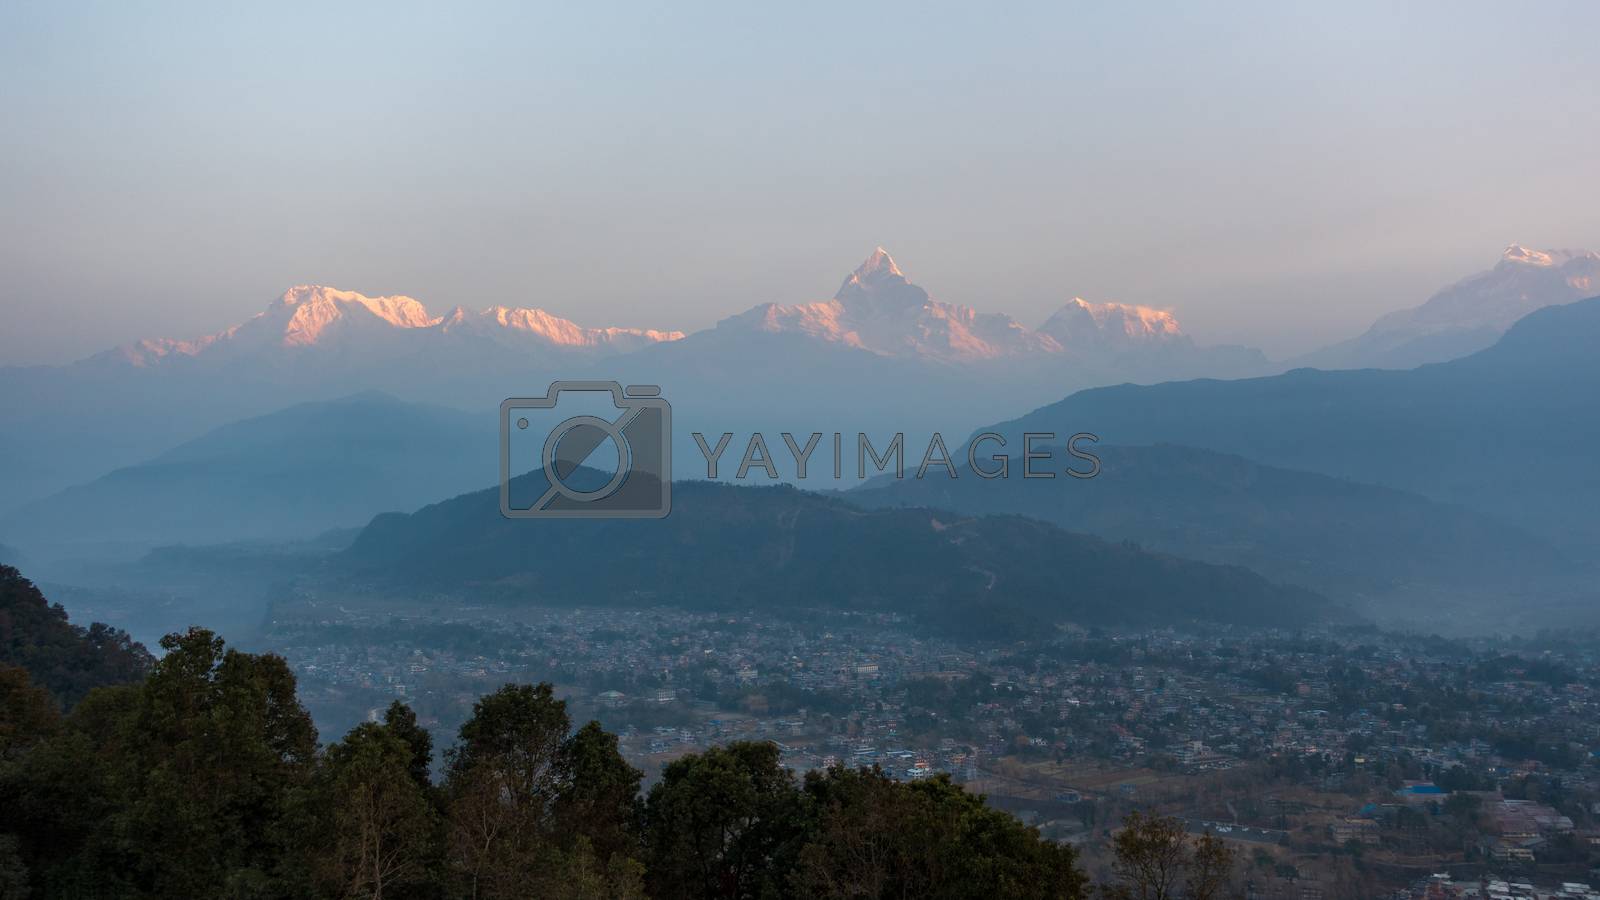 Royalty free image of Sunrise view from Sarangkot in Nepal by dutourdumonde